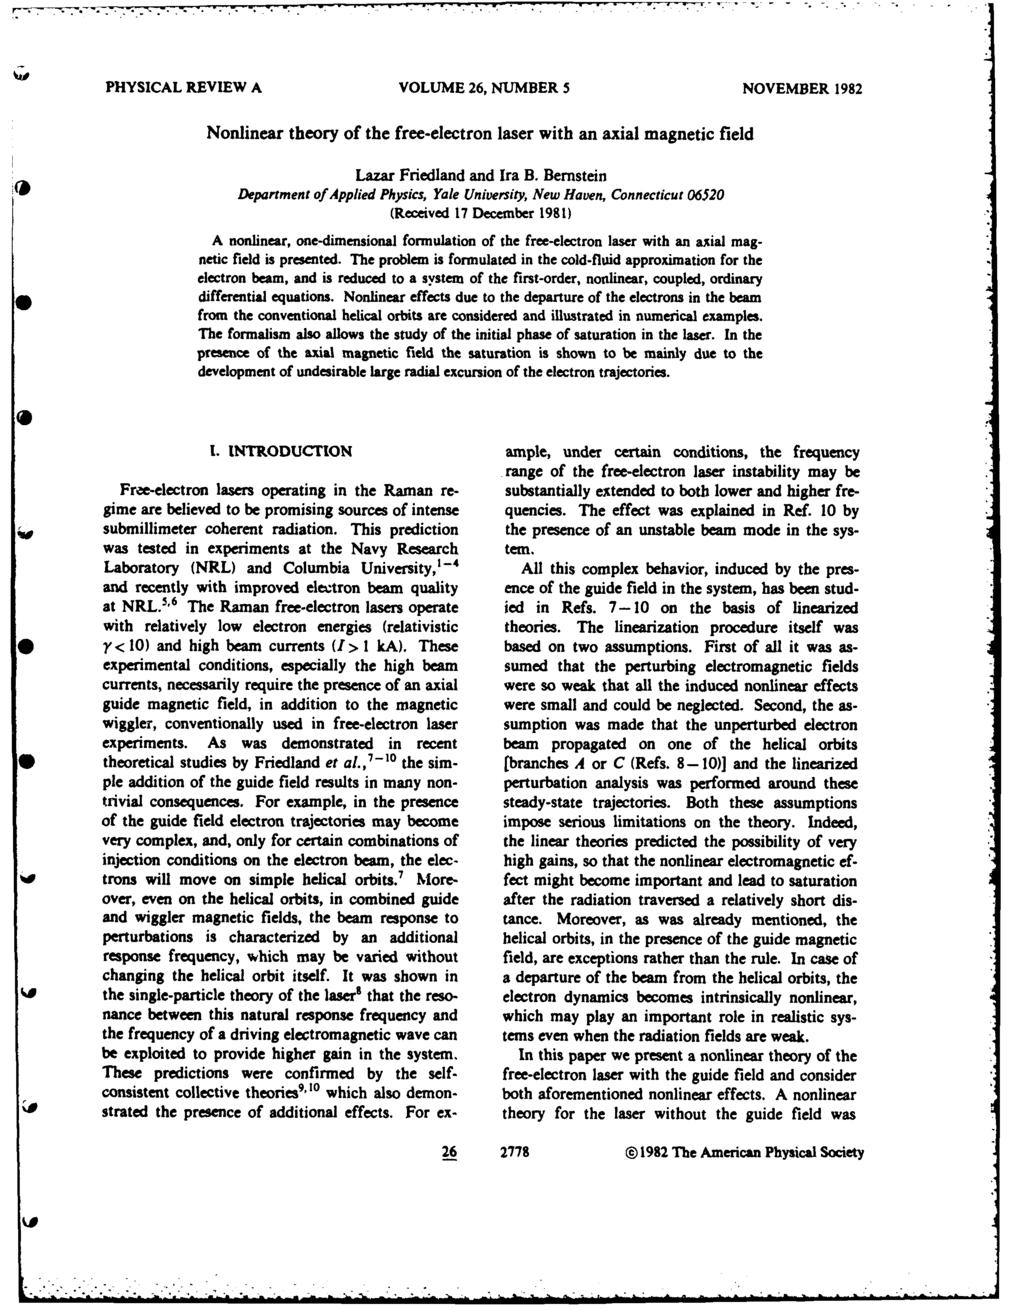 PHYSICAL REVIEW A VOLUME 26, NUMBER 5 NOVEMBER 1982 Nonlinear theory of the free-electron laser with an axial magnetic field Lazar Friedland and Ira B.